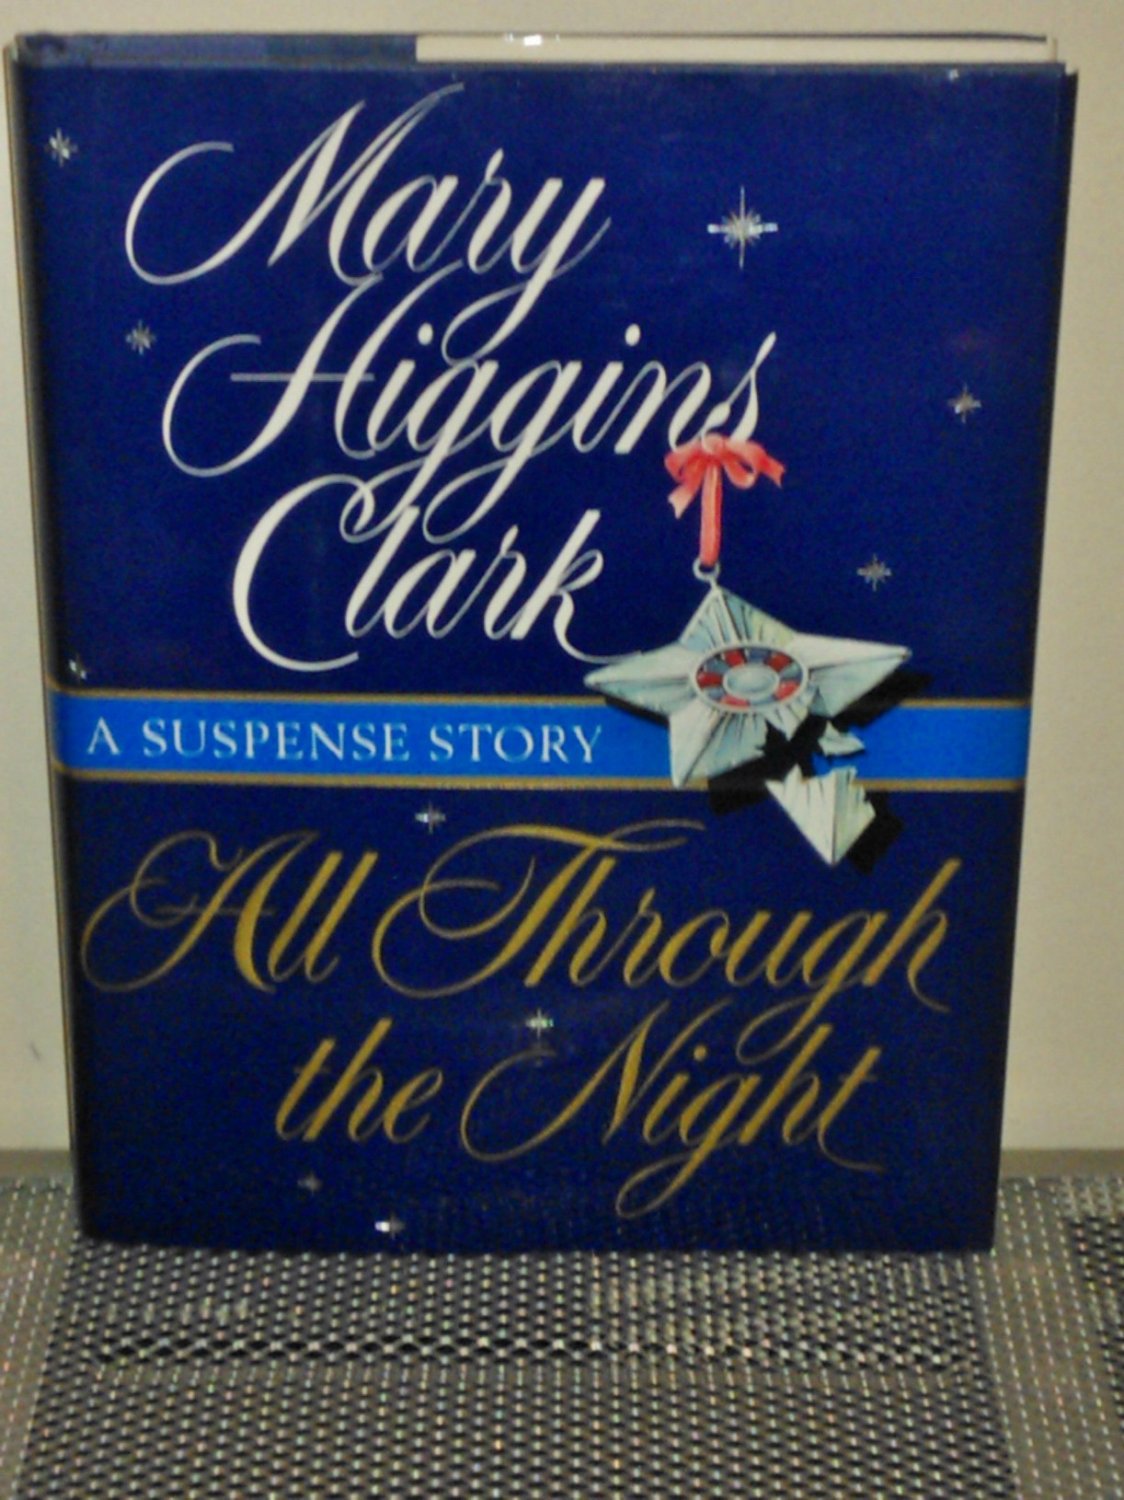 All Through the Night by Mary Clark Higgins (1998 Hardcover)